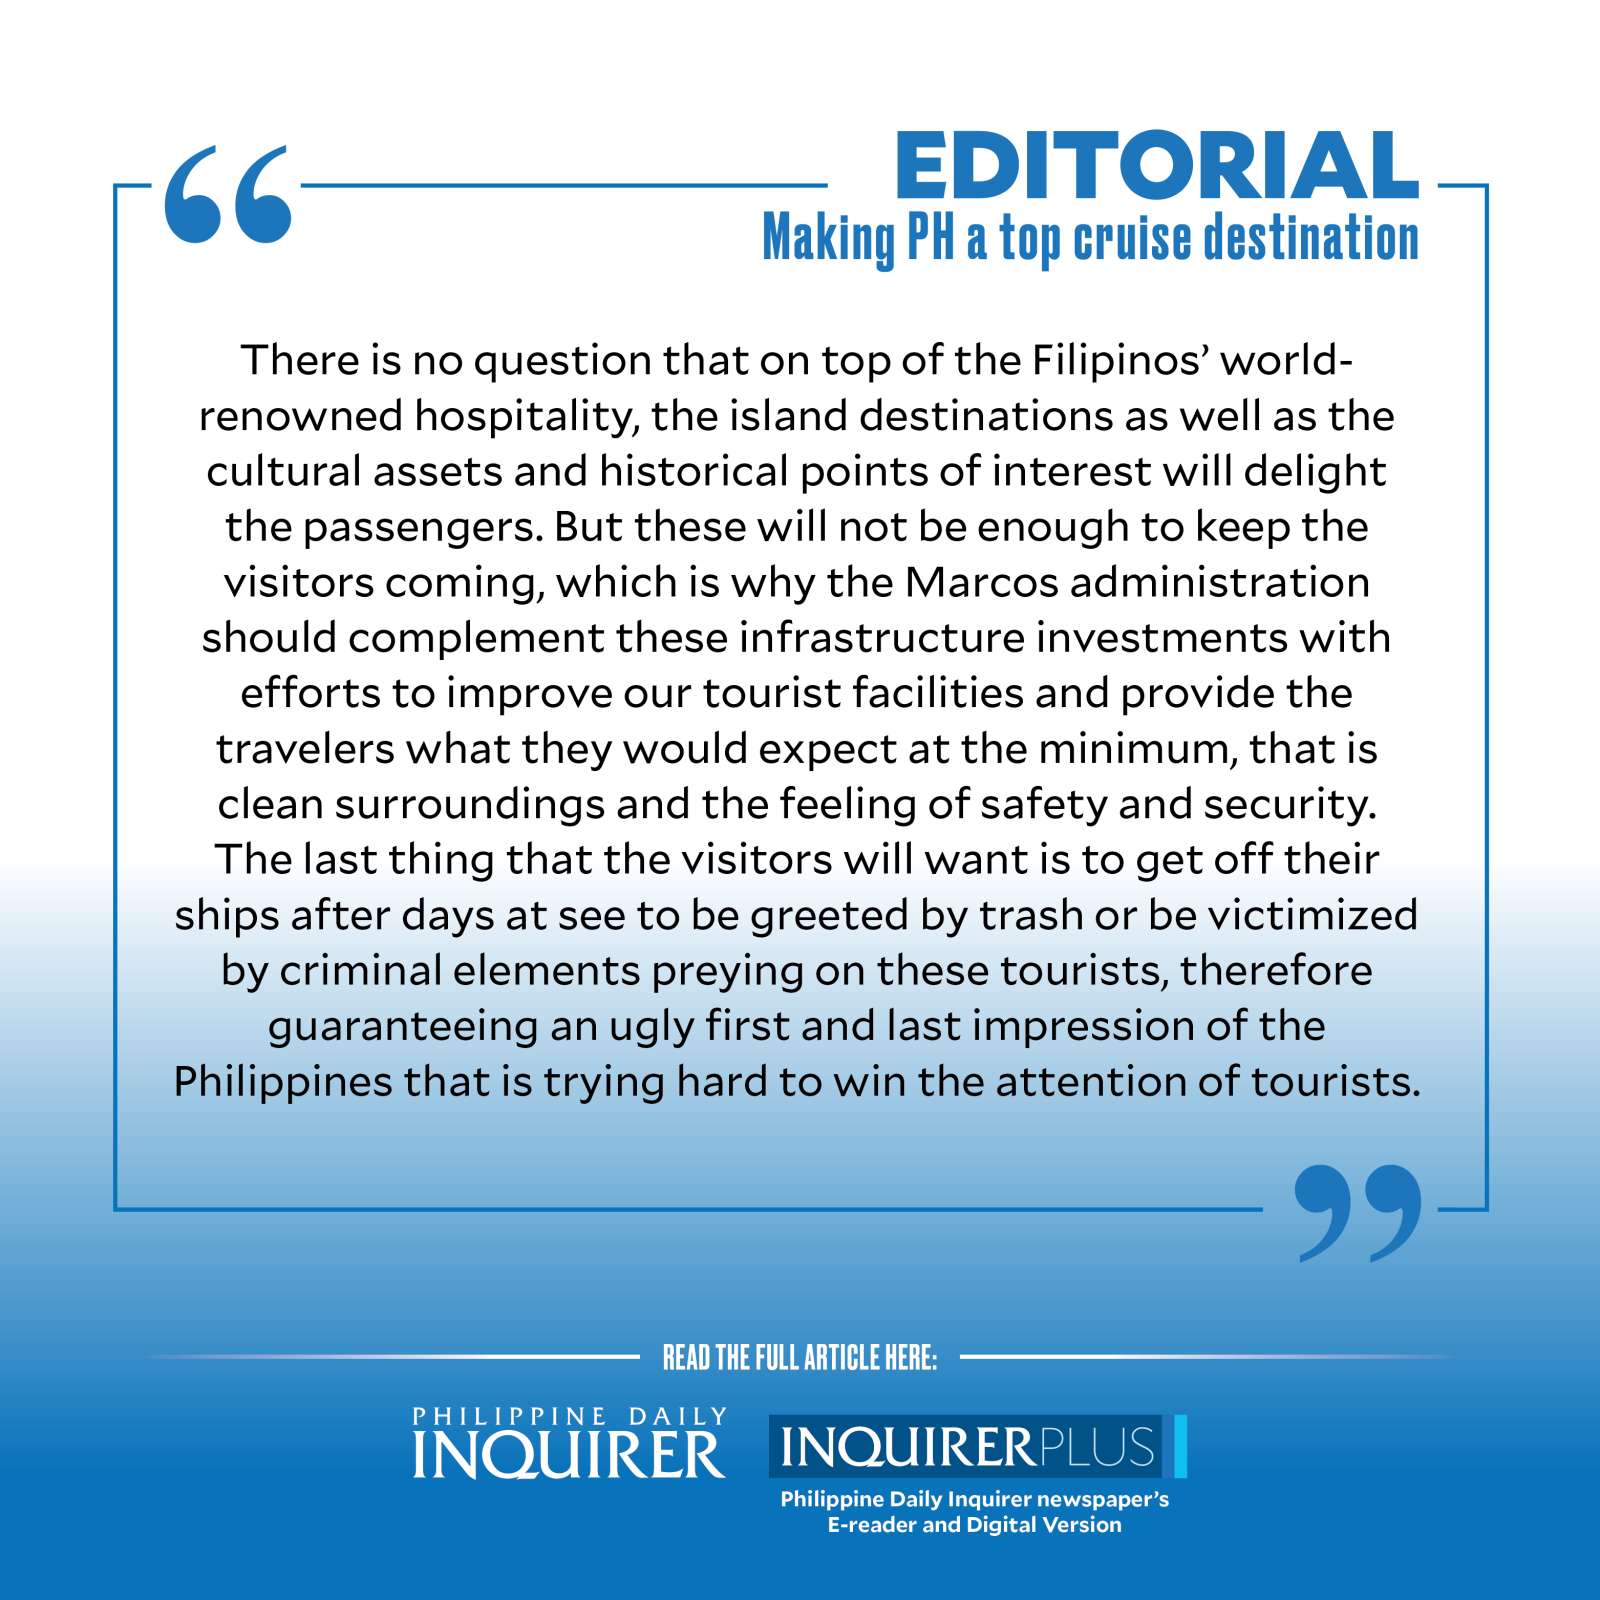 Quote card for Editorial: Making PH a top cruise destination